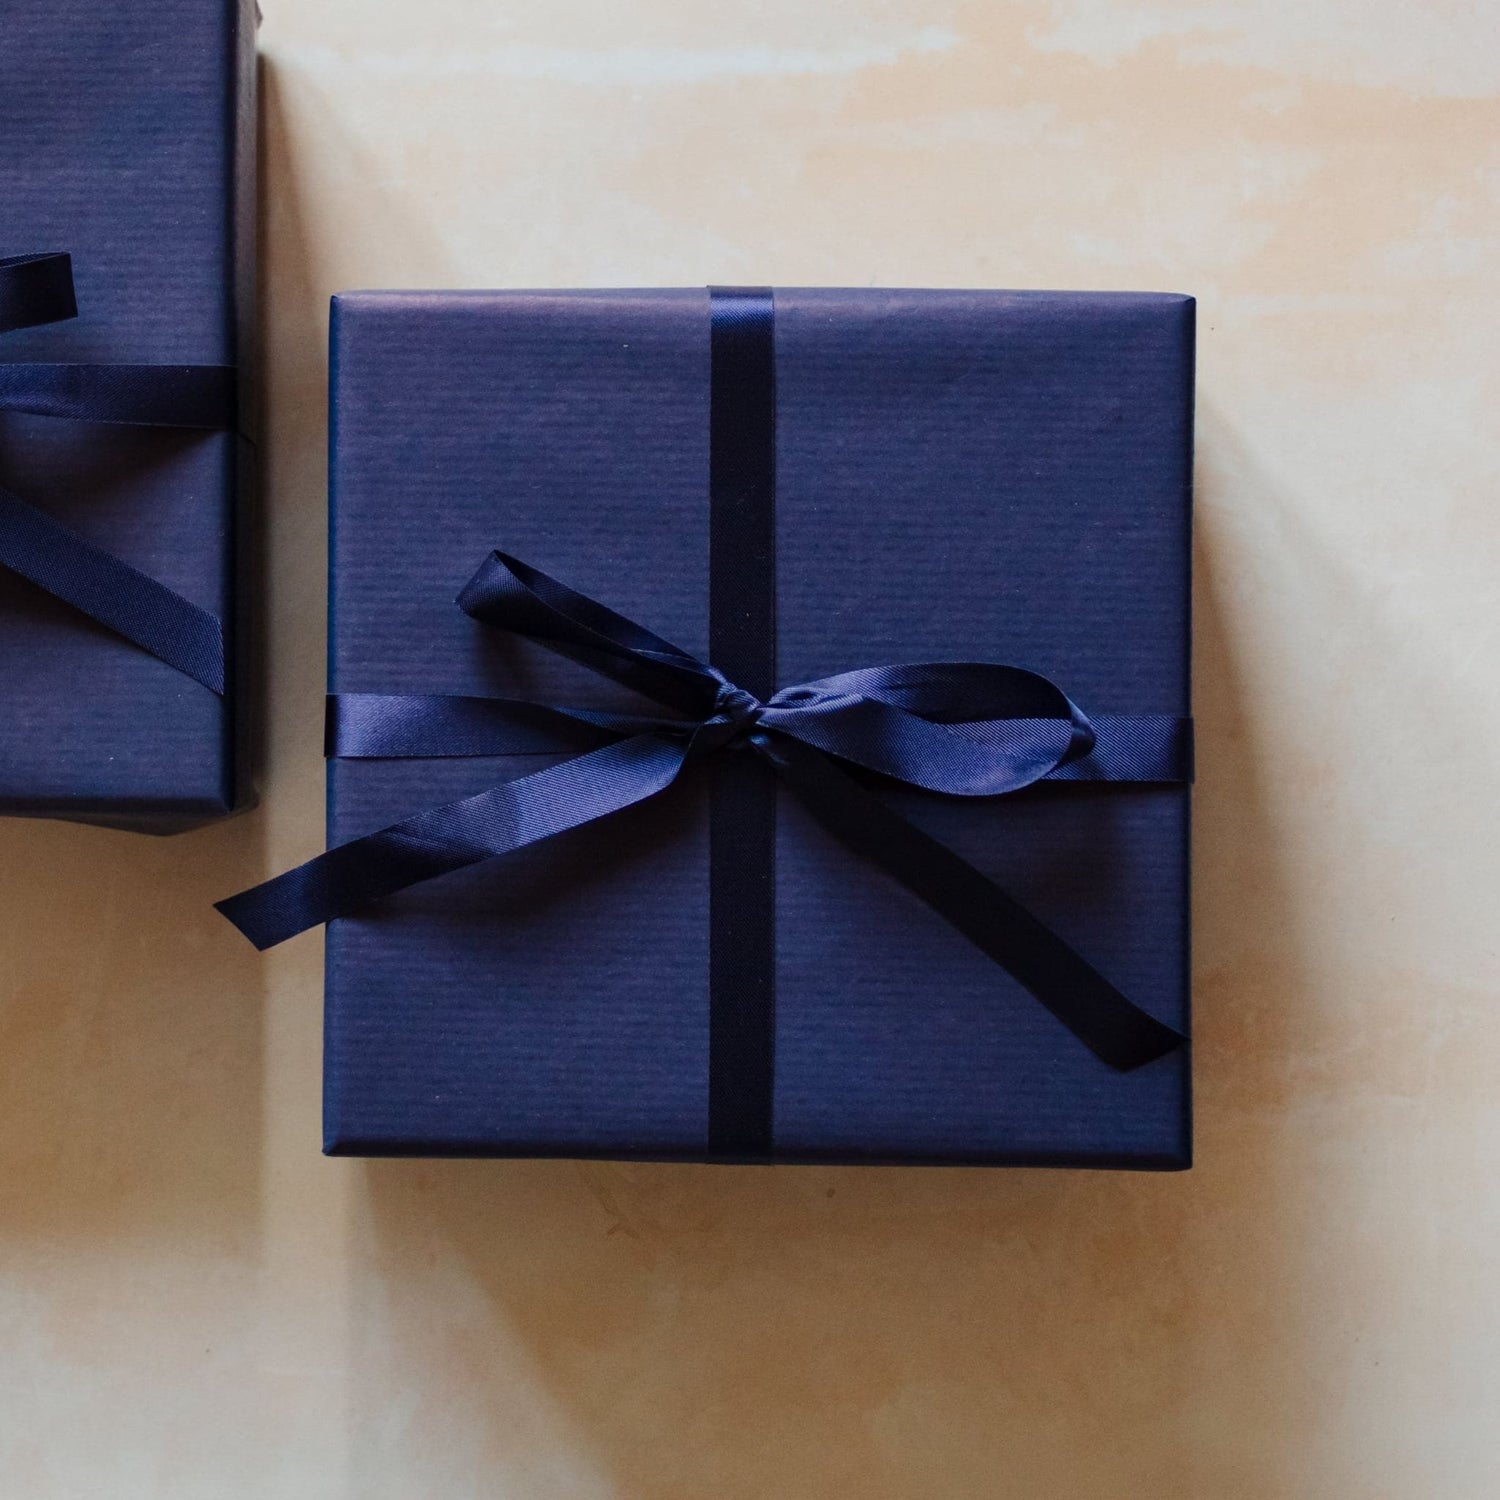 A 400g blackberry scented large 3 wick soy candle from the Home County Co. is shown with luxury Gift Wrap. The 3 wick candle is wrapped in luxury navy wrapping paper secured with navy ribbon.